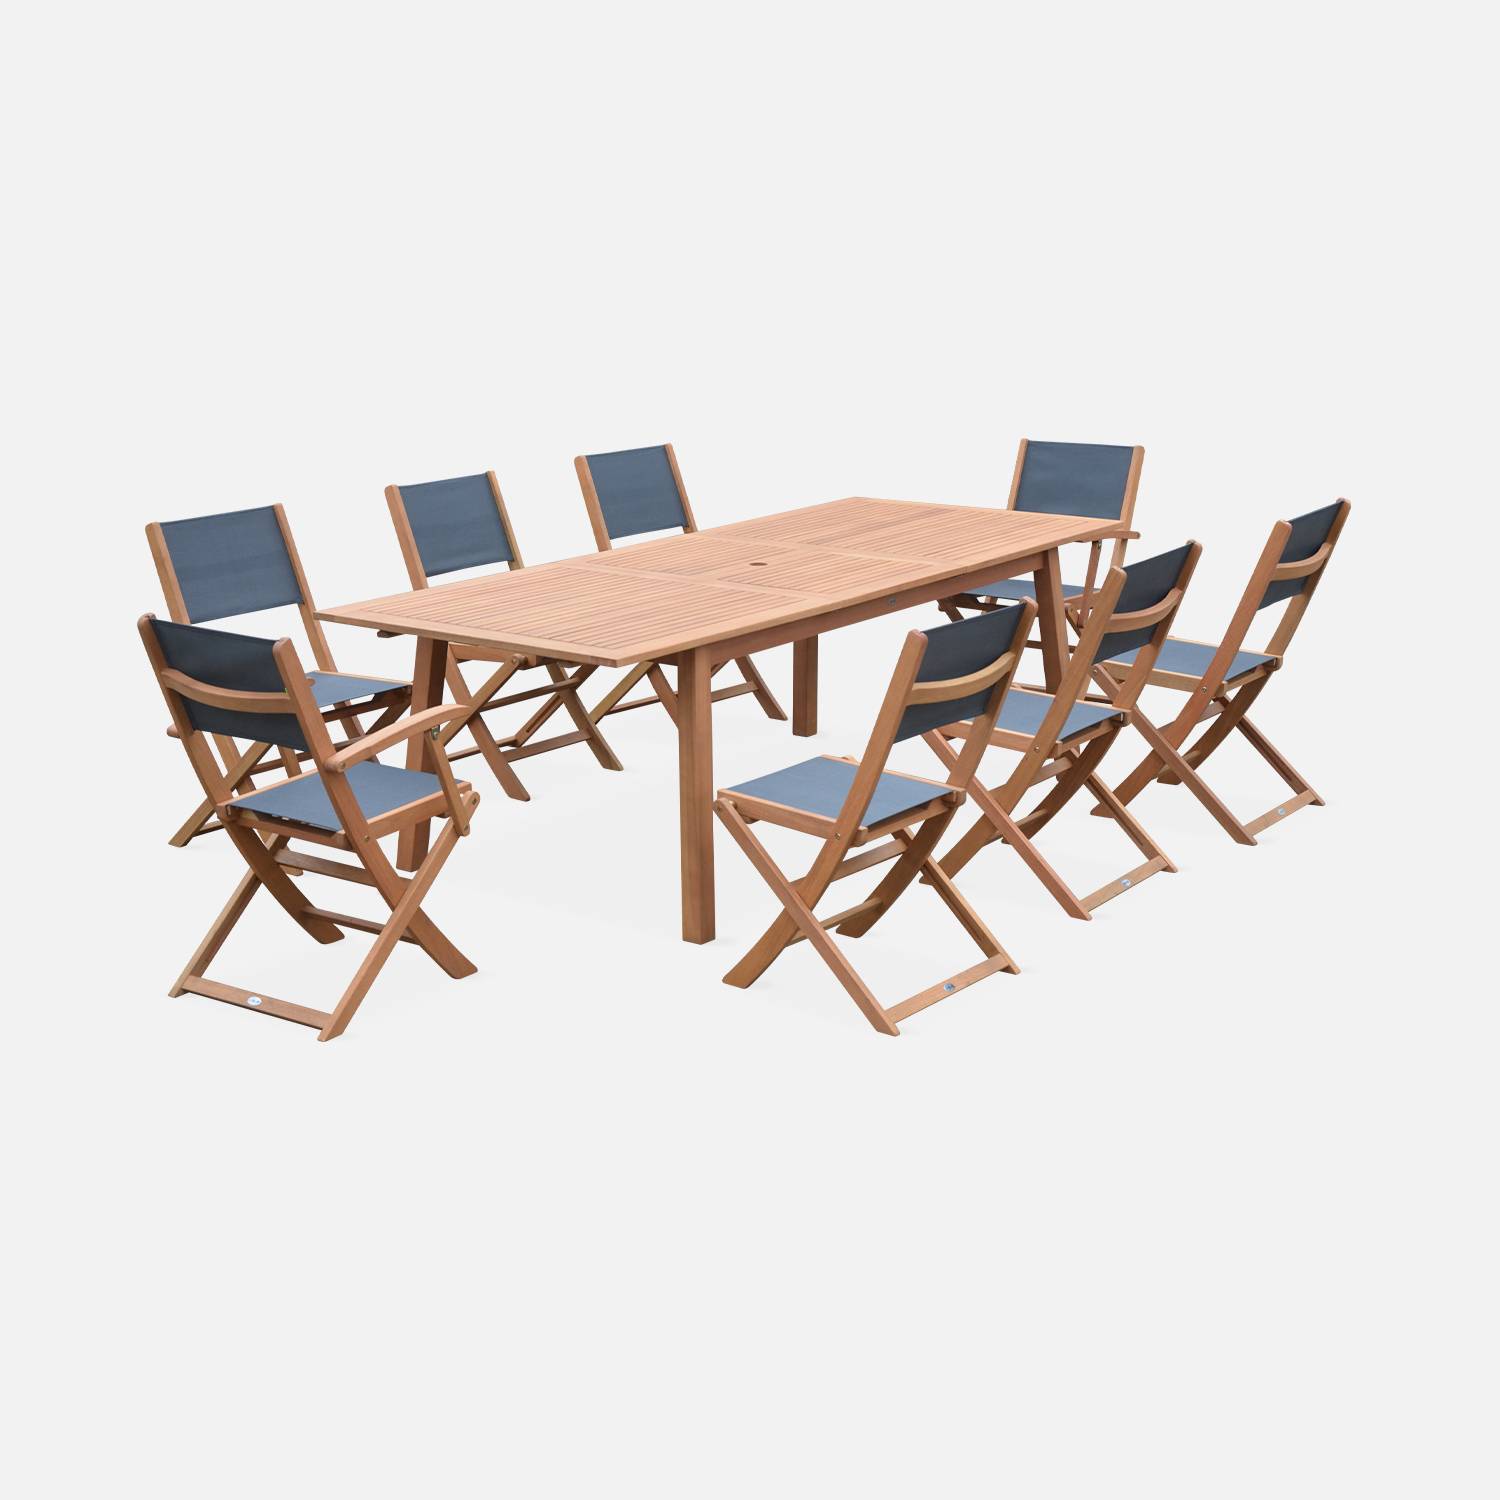 8-seater garden dining set, extendable 180-240cm FSC-eucalyptus wooden table, 6 chairs and 2 armchairs - Almeria 8 - Anthracite textilene seats Photo3